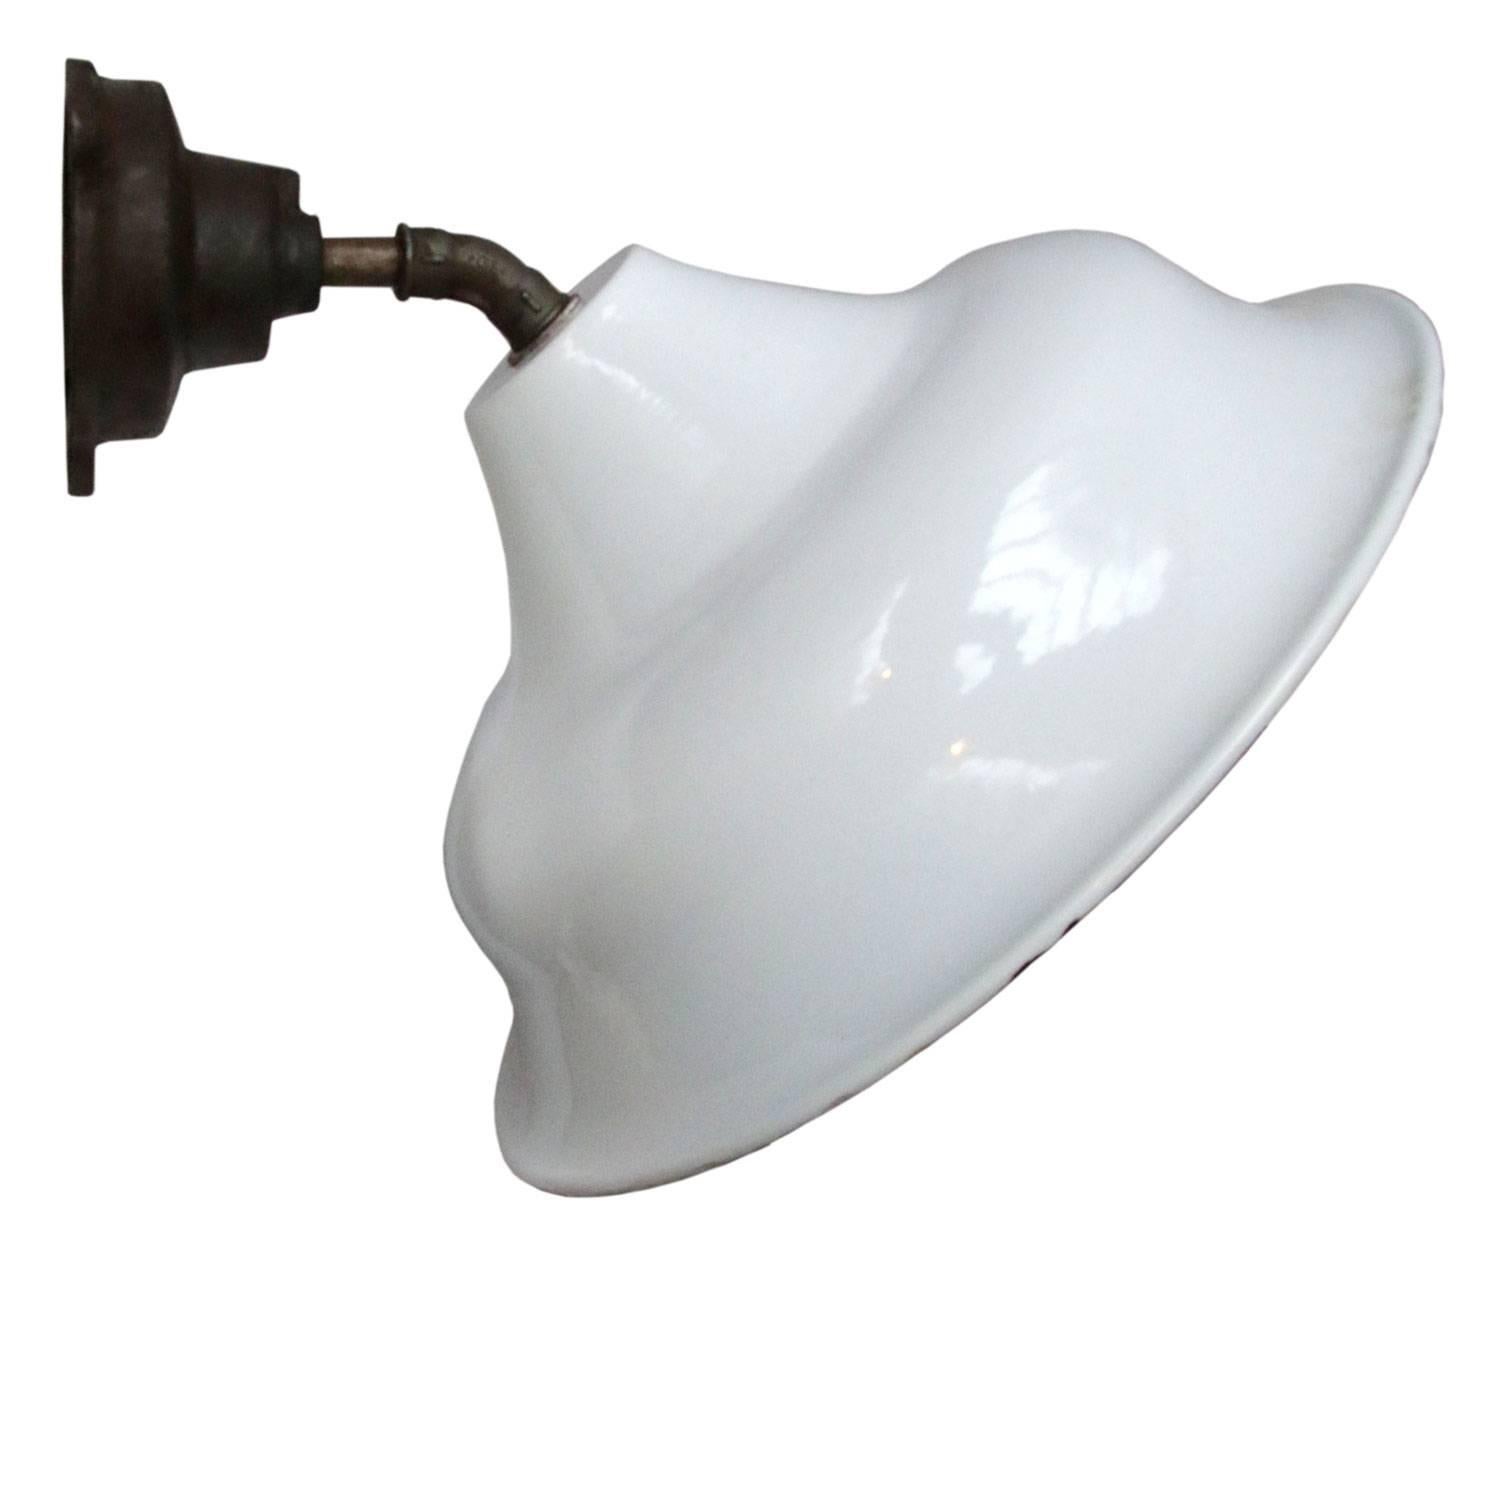 factory wall light
45 degrees
white enamel, white interior

diameter cast iron wall piece: 12 cm, 3 holes to secure

Weight: 3.9 kg / 8.6 lb

Priced per individual item. All lamps have been made suitable by international standards for